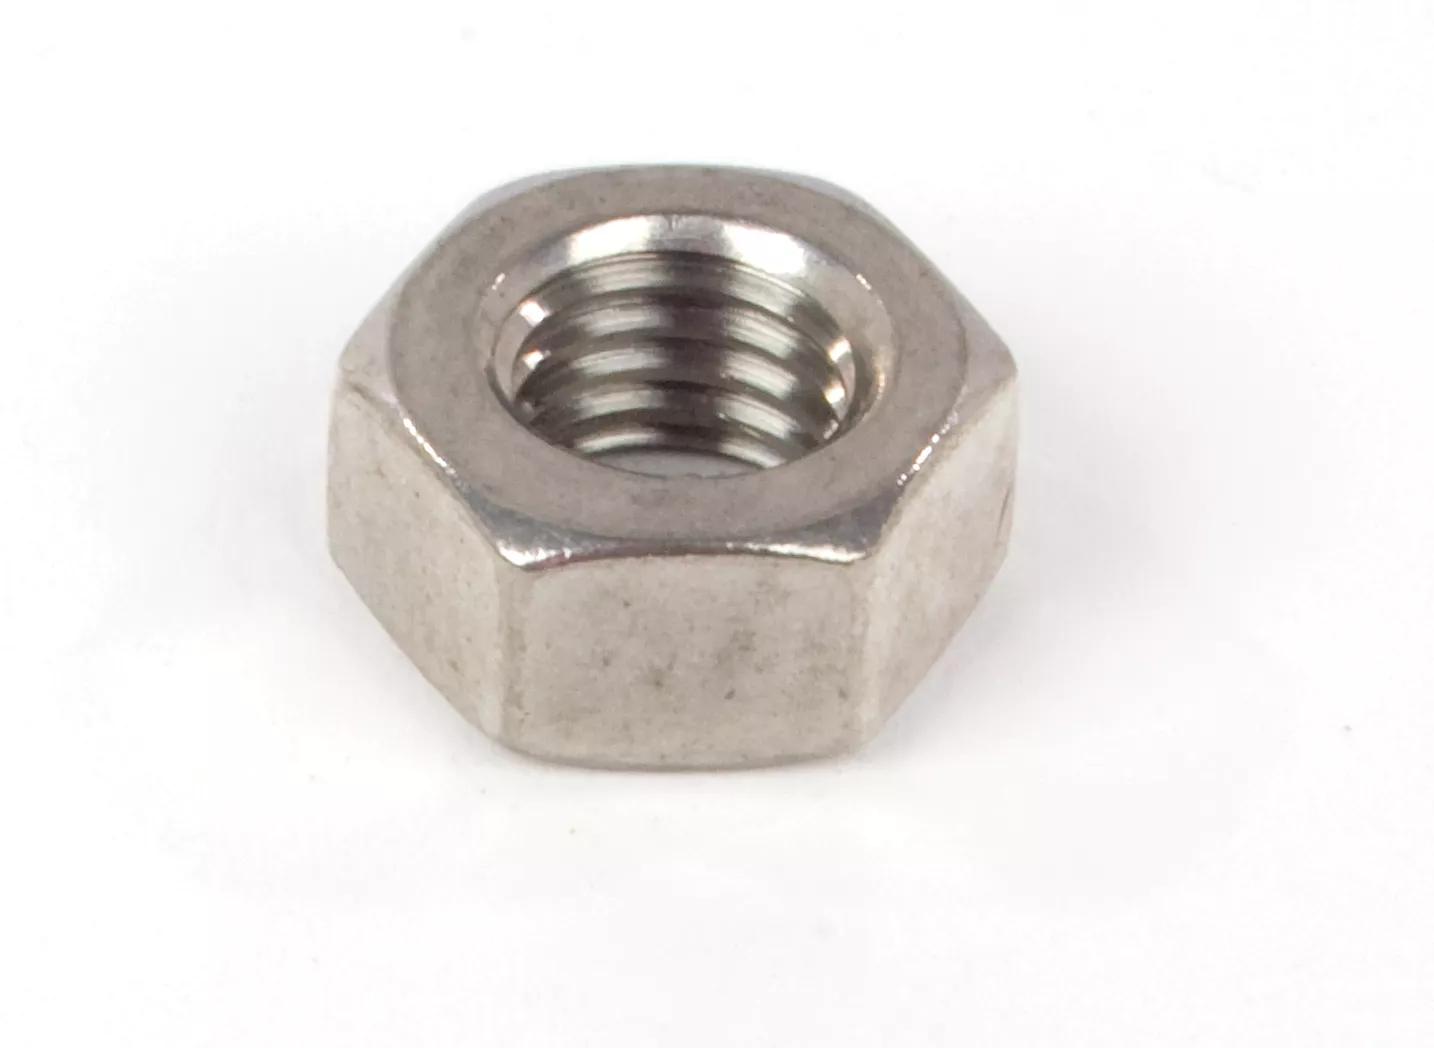 M2 x 0.40 18-8 Stainless Steel (USS) Hex Nut